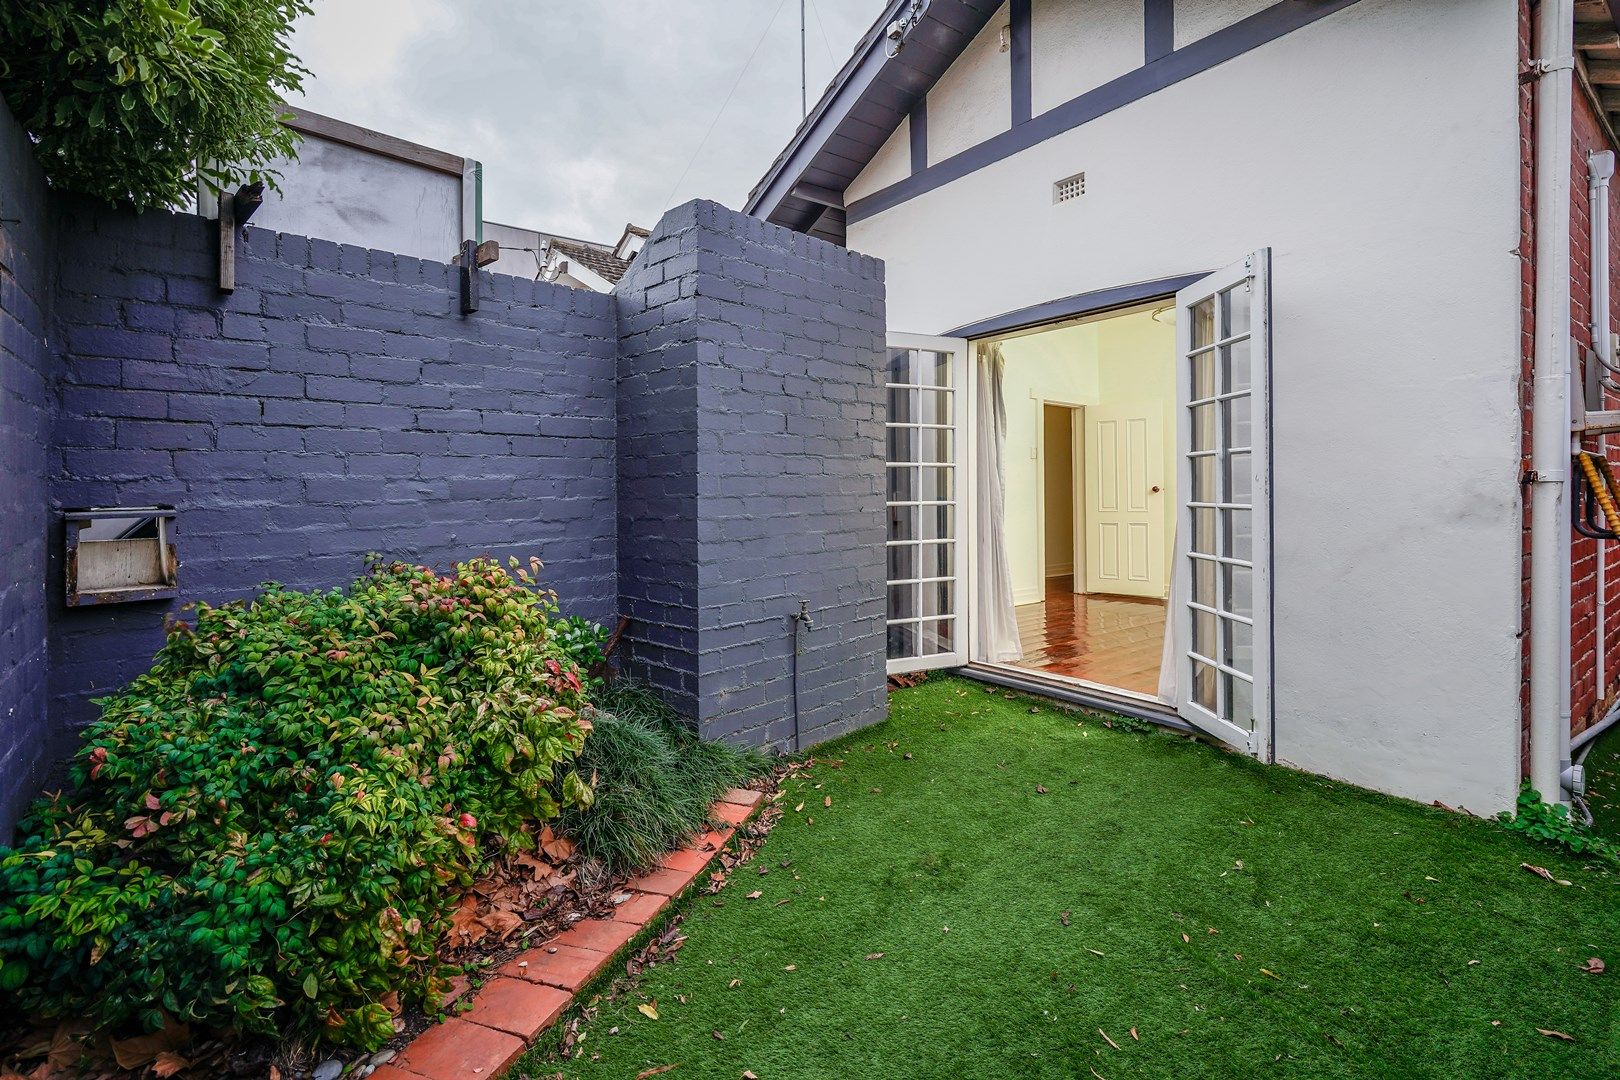 2 bedrooms House in 5 May Grove SOUTH YARRA VIC, 3141